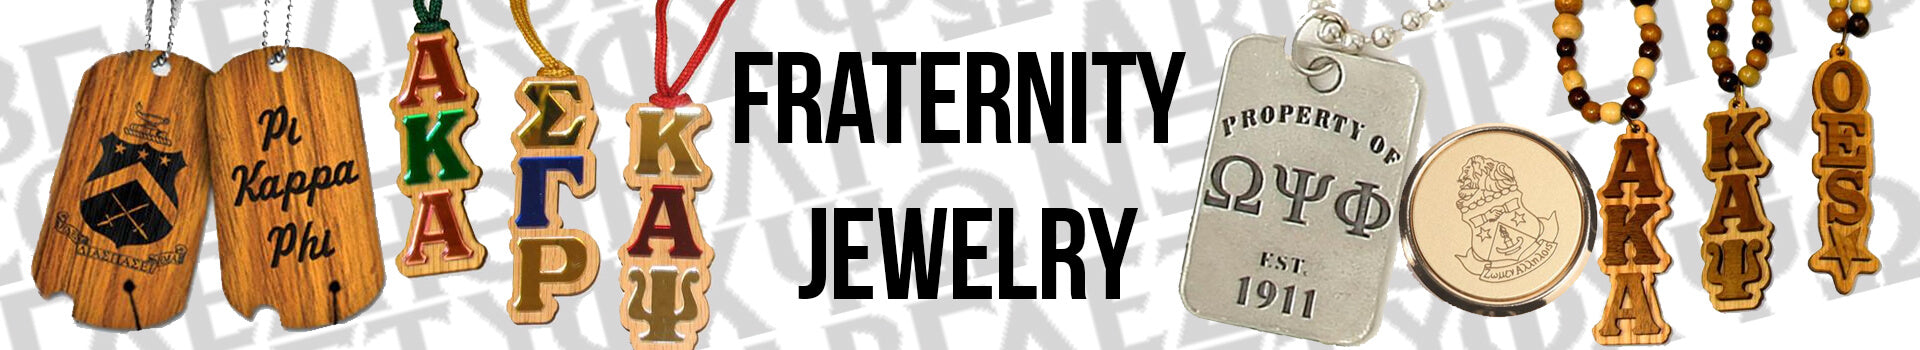 Custom Greek Fraternity Jewelry and Necklaces